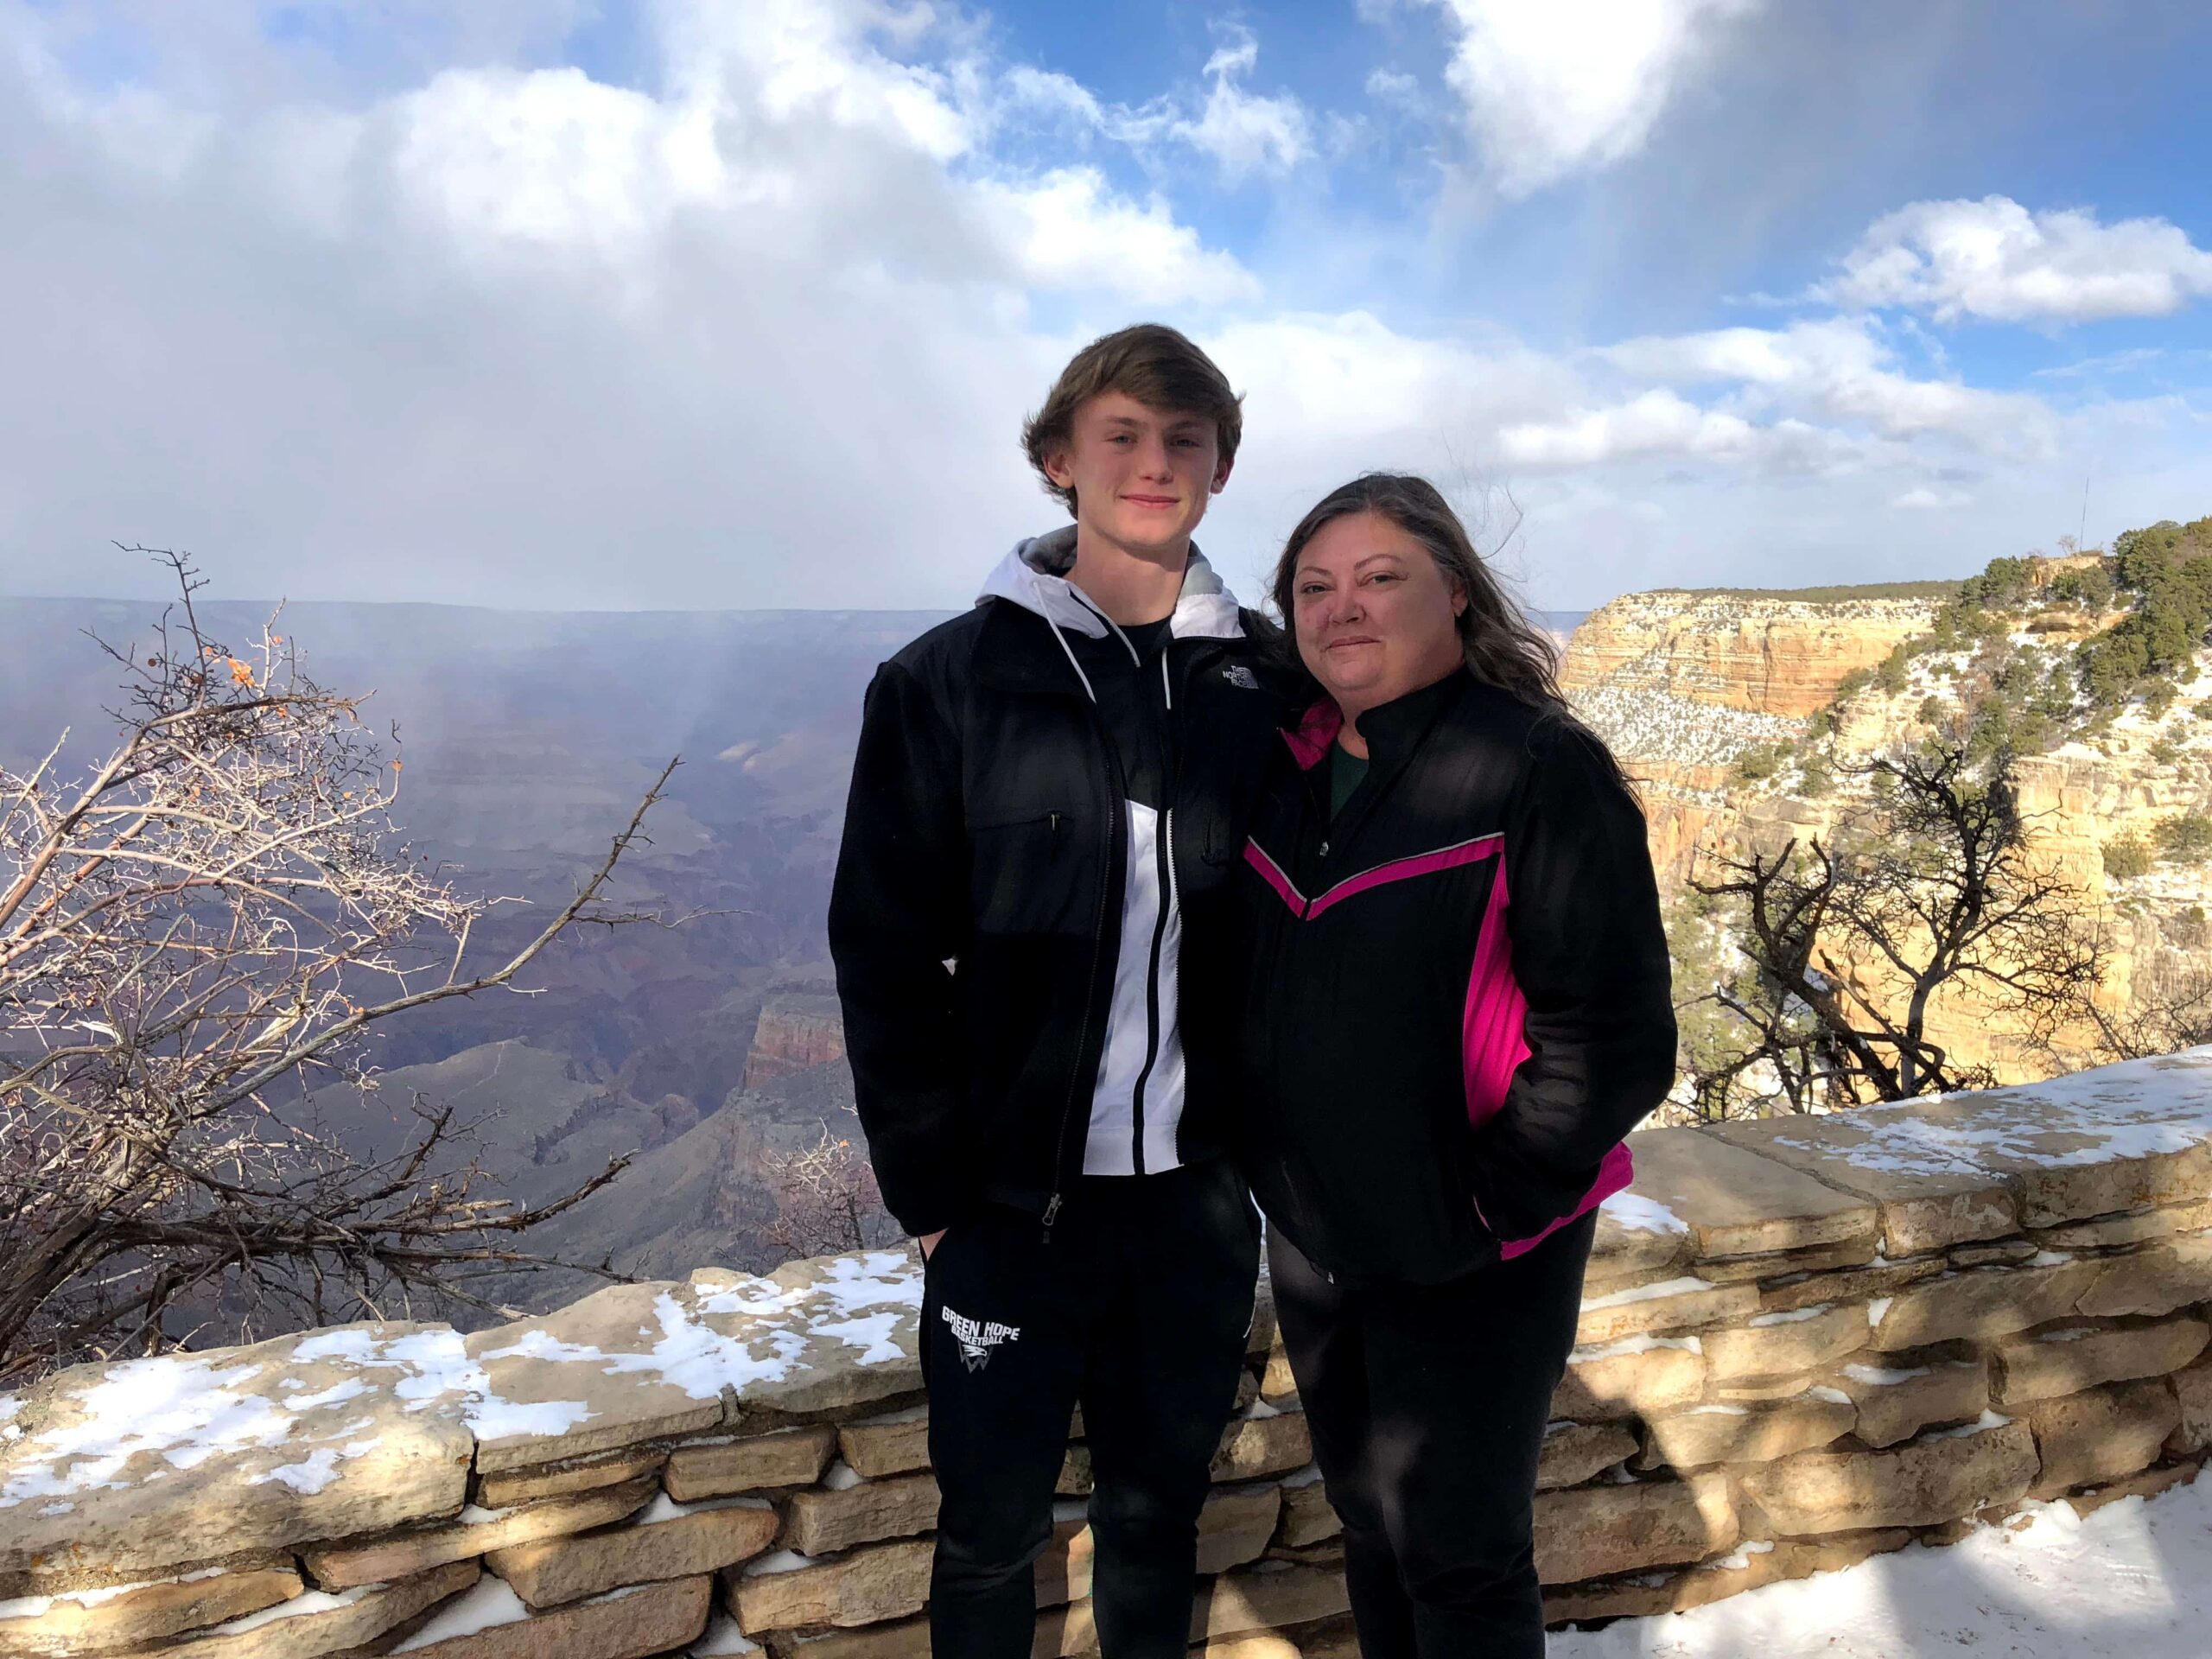 Chris Hall and his mom, Lynne, at the Grand Canyon.